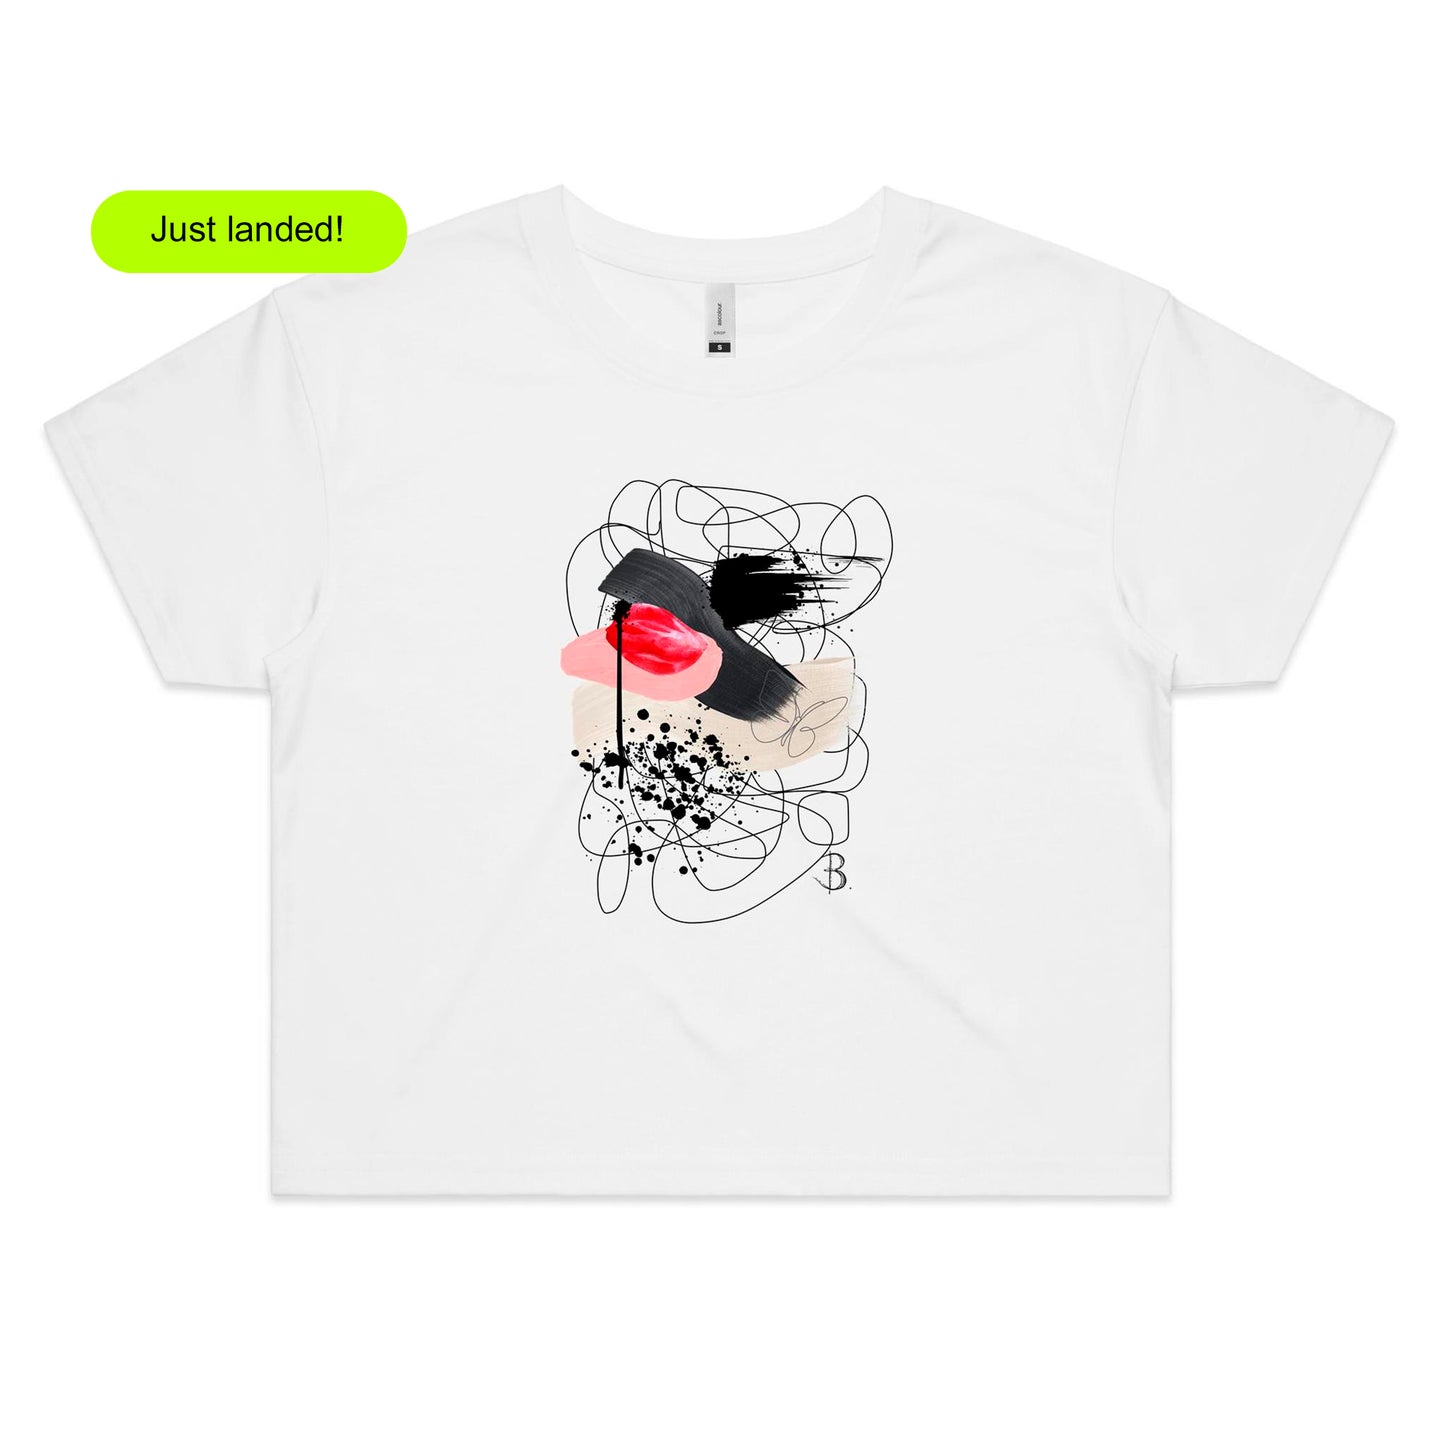 'Swatch Crop Top Tee Black and Pink' Front,Women's White Luxe Cotton Crop. with Exclusive Print Designed by Bridget Bradley for B. Streetwear. Sustainable Cotton Australia You'' Love to Wear. Find your Size now!